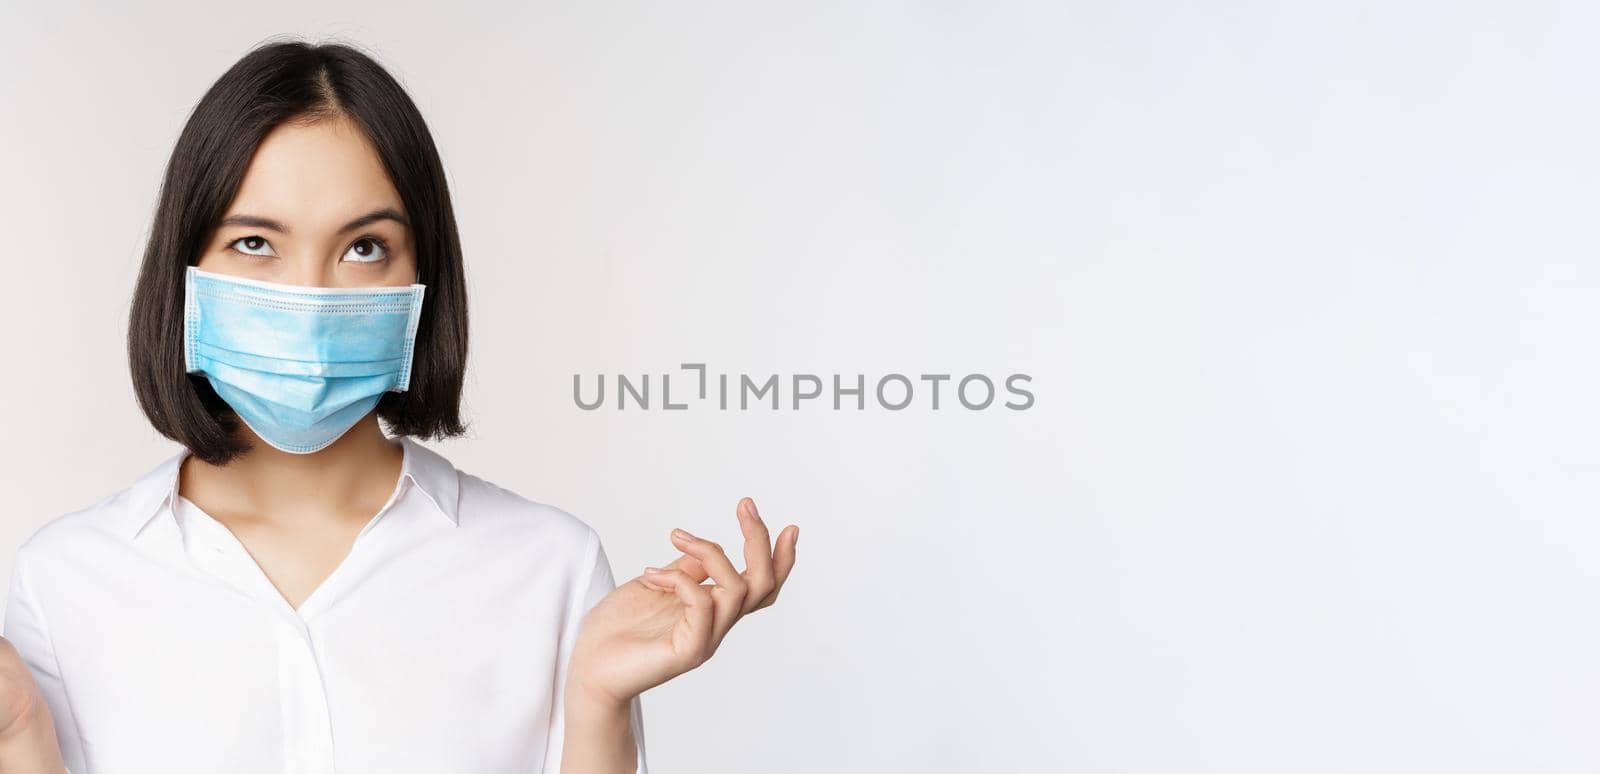 Annoyed asian woman in medical face mask, shrugging and looking up with bothered face expression, standing over white background.